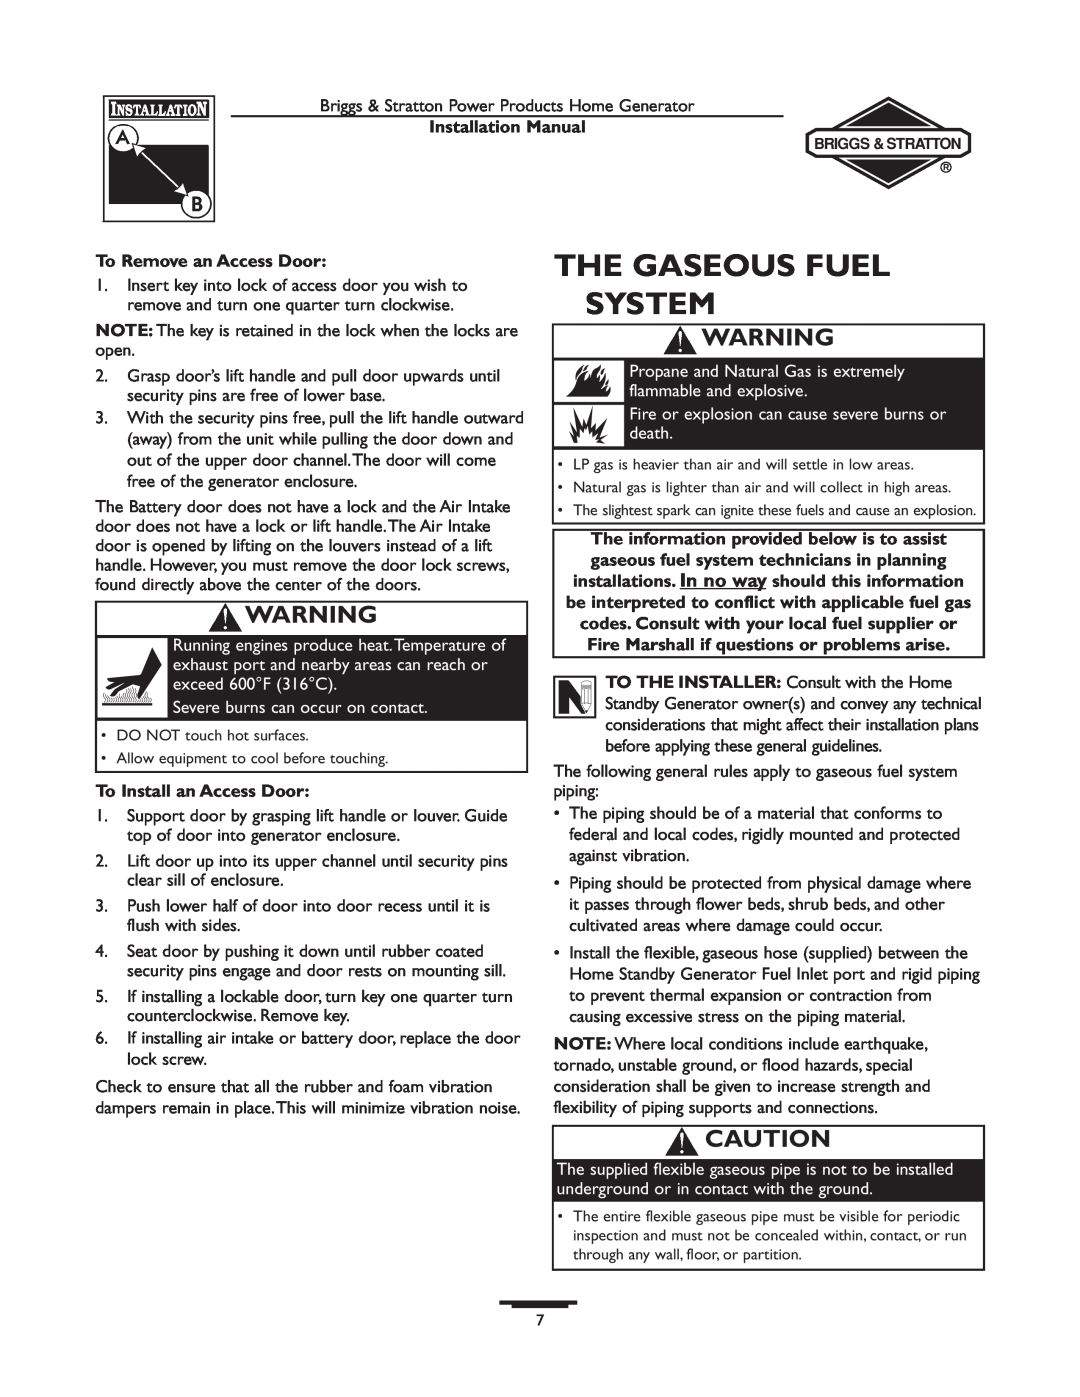 Briggs & Stratton 01815-0, 01938-0 The Gaseous Fuel System, To Remove an Access Door, Severe burns can occur on contact 